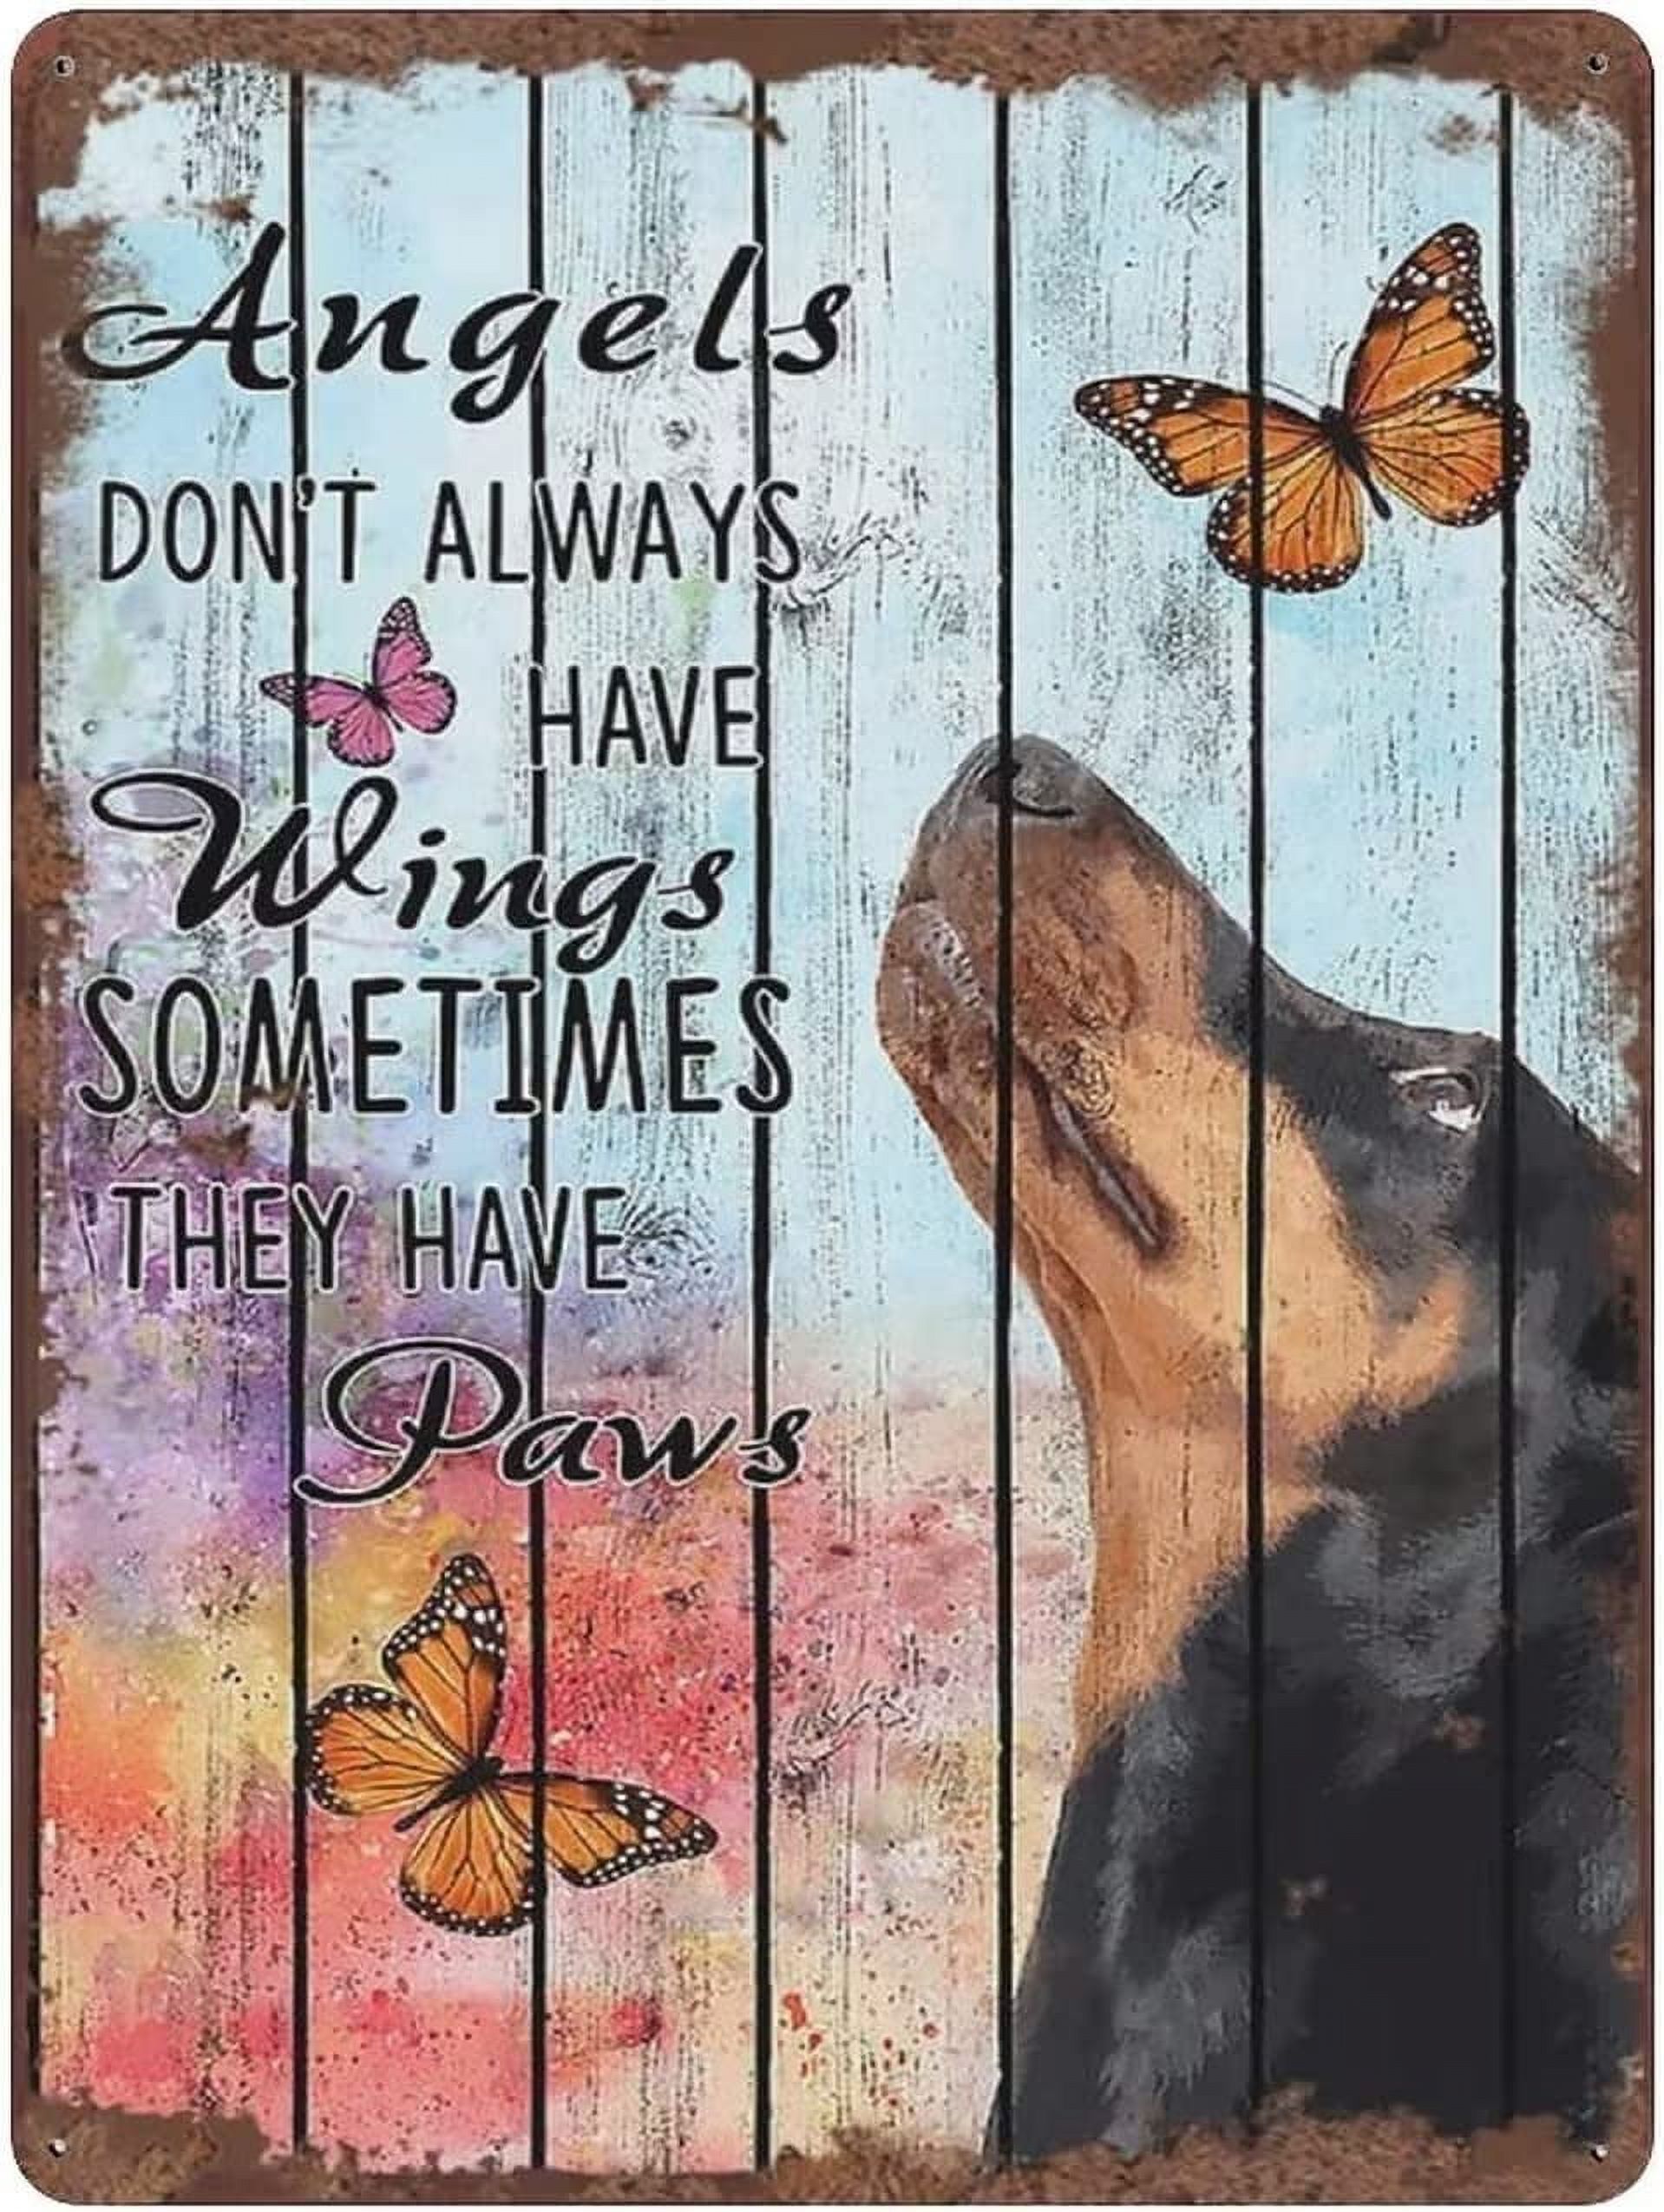 Angels Don't Always Have Wings The Metal Sign Dachshund And Butterflies Vintage Tin Poster Kitchen Garden Parlor Cafe Office Home Wall Decor Plaque 12x16 Inch - image 1 of 5